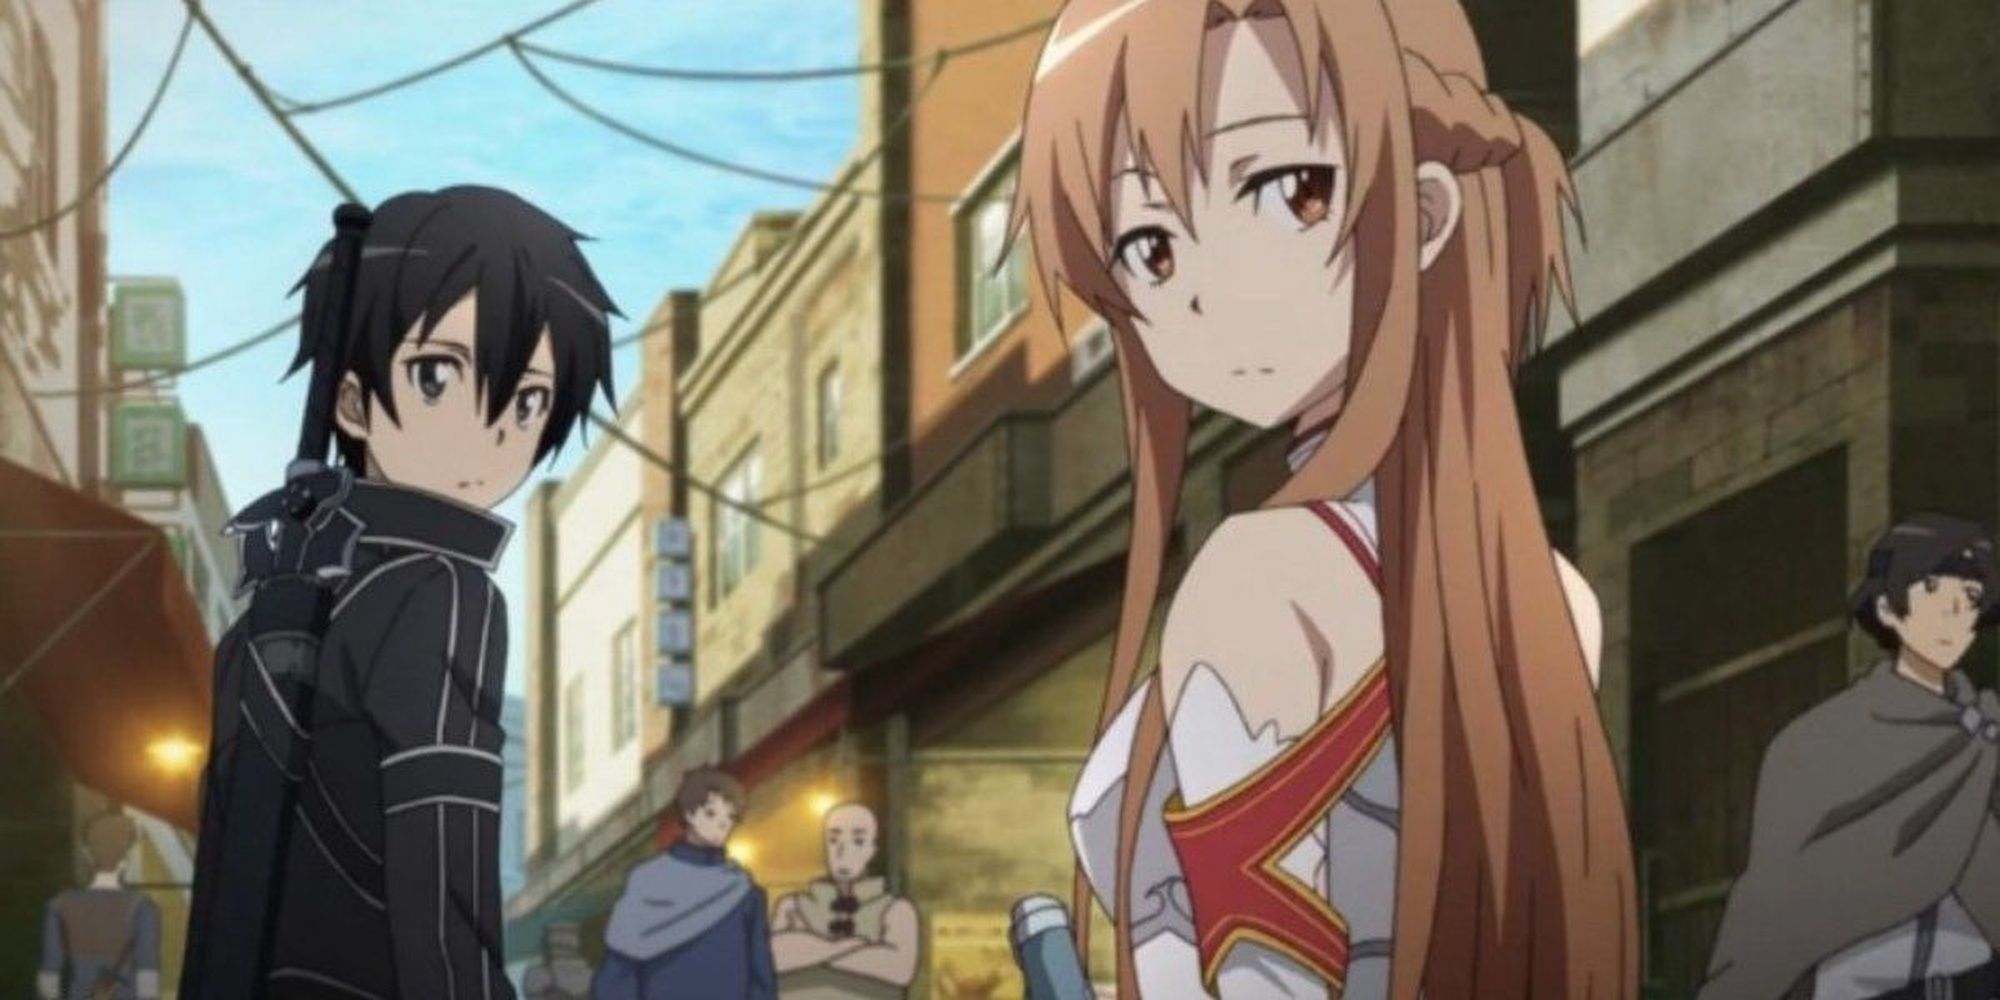 Kirito and Asuna find their way back in Sword Art Online